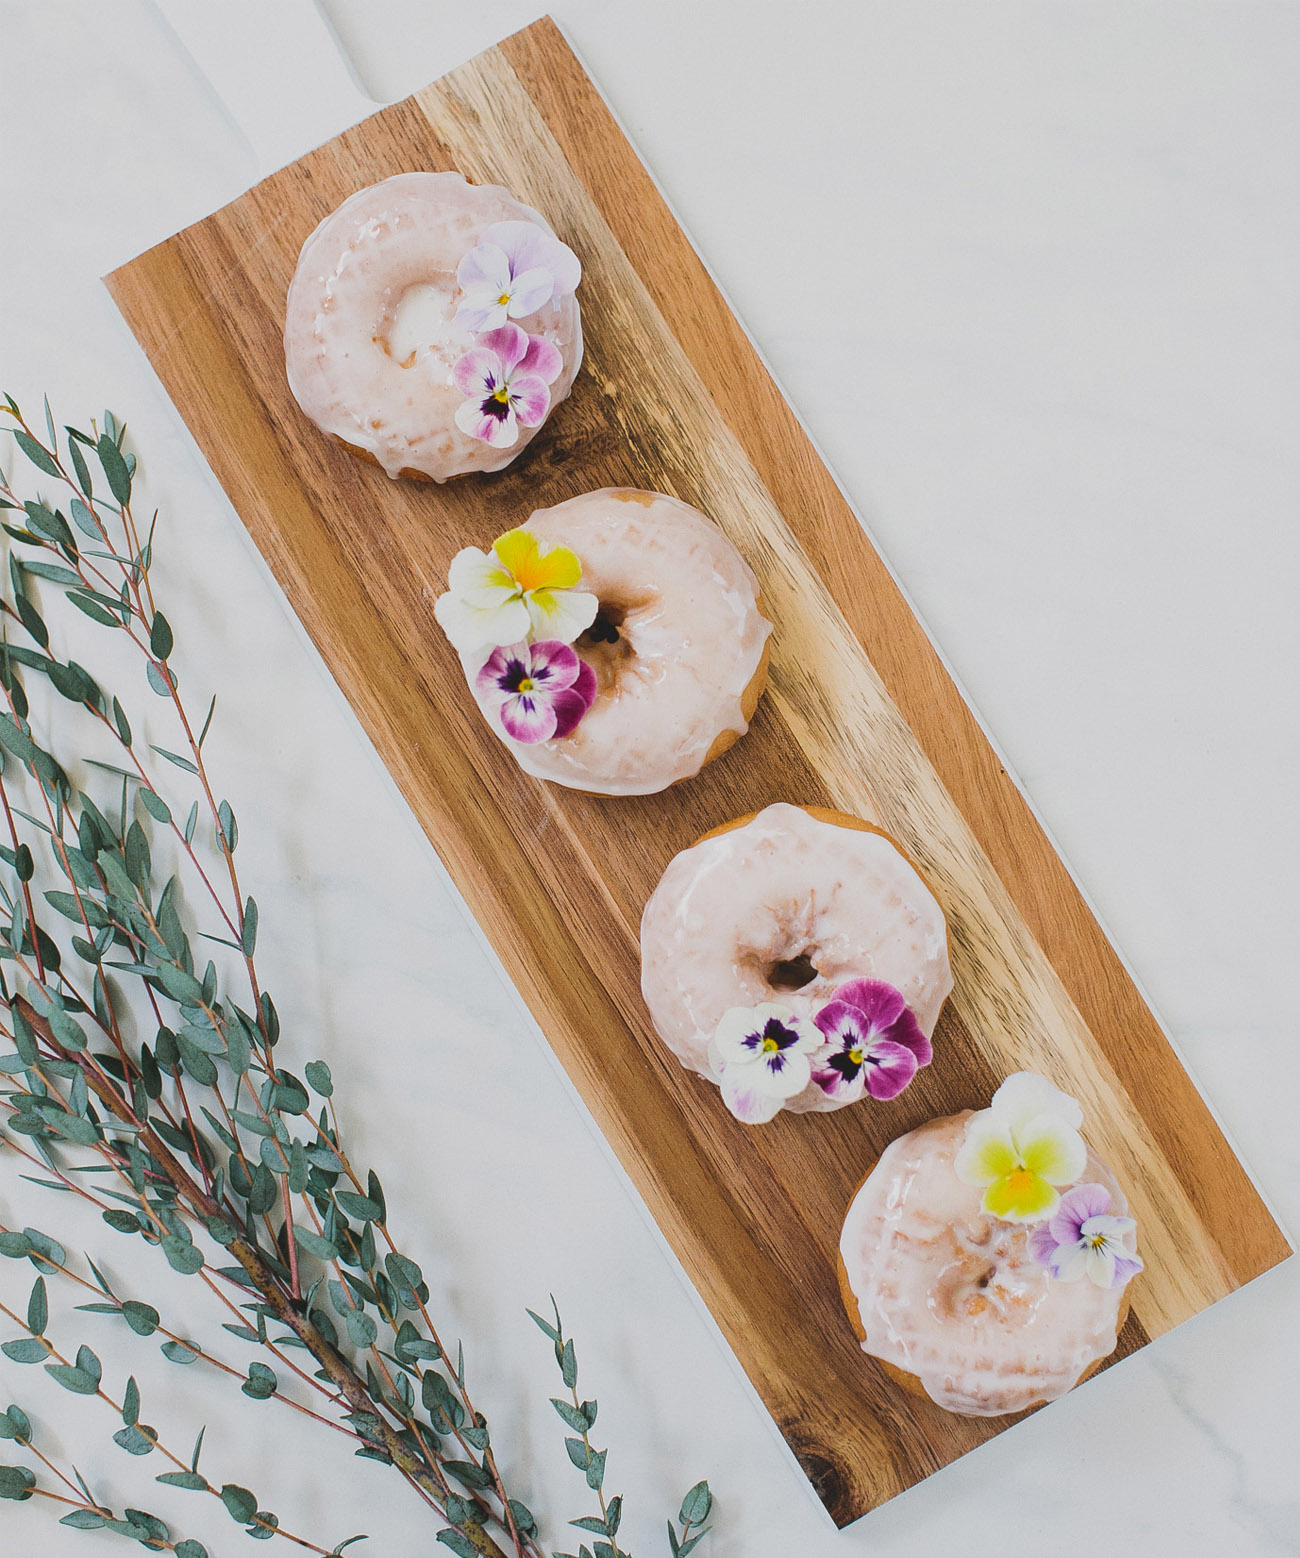 donuts with edible florals